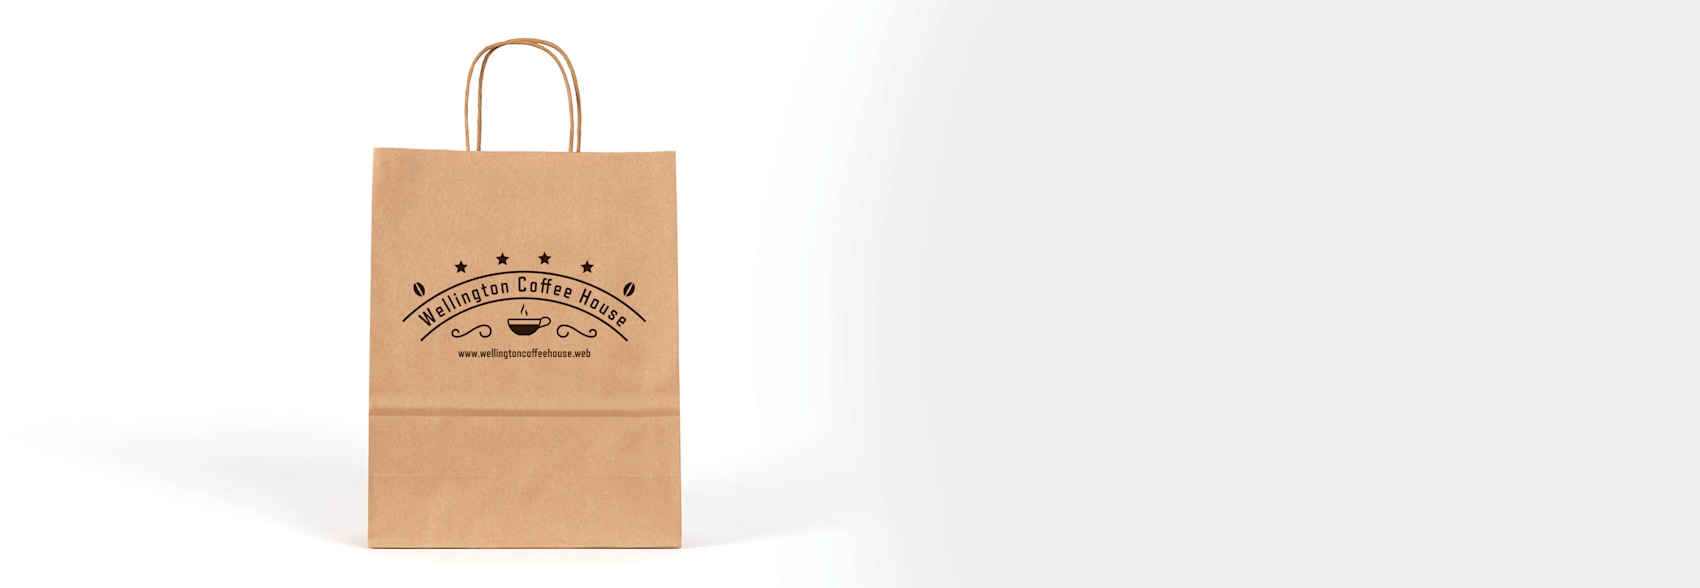 Larger version: brown paper bag with business logo